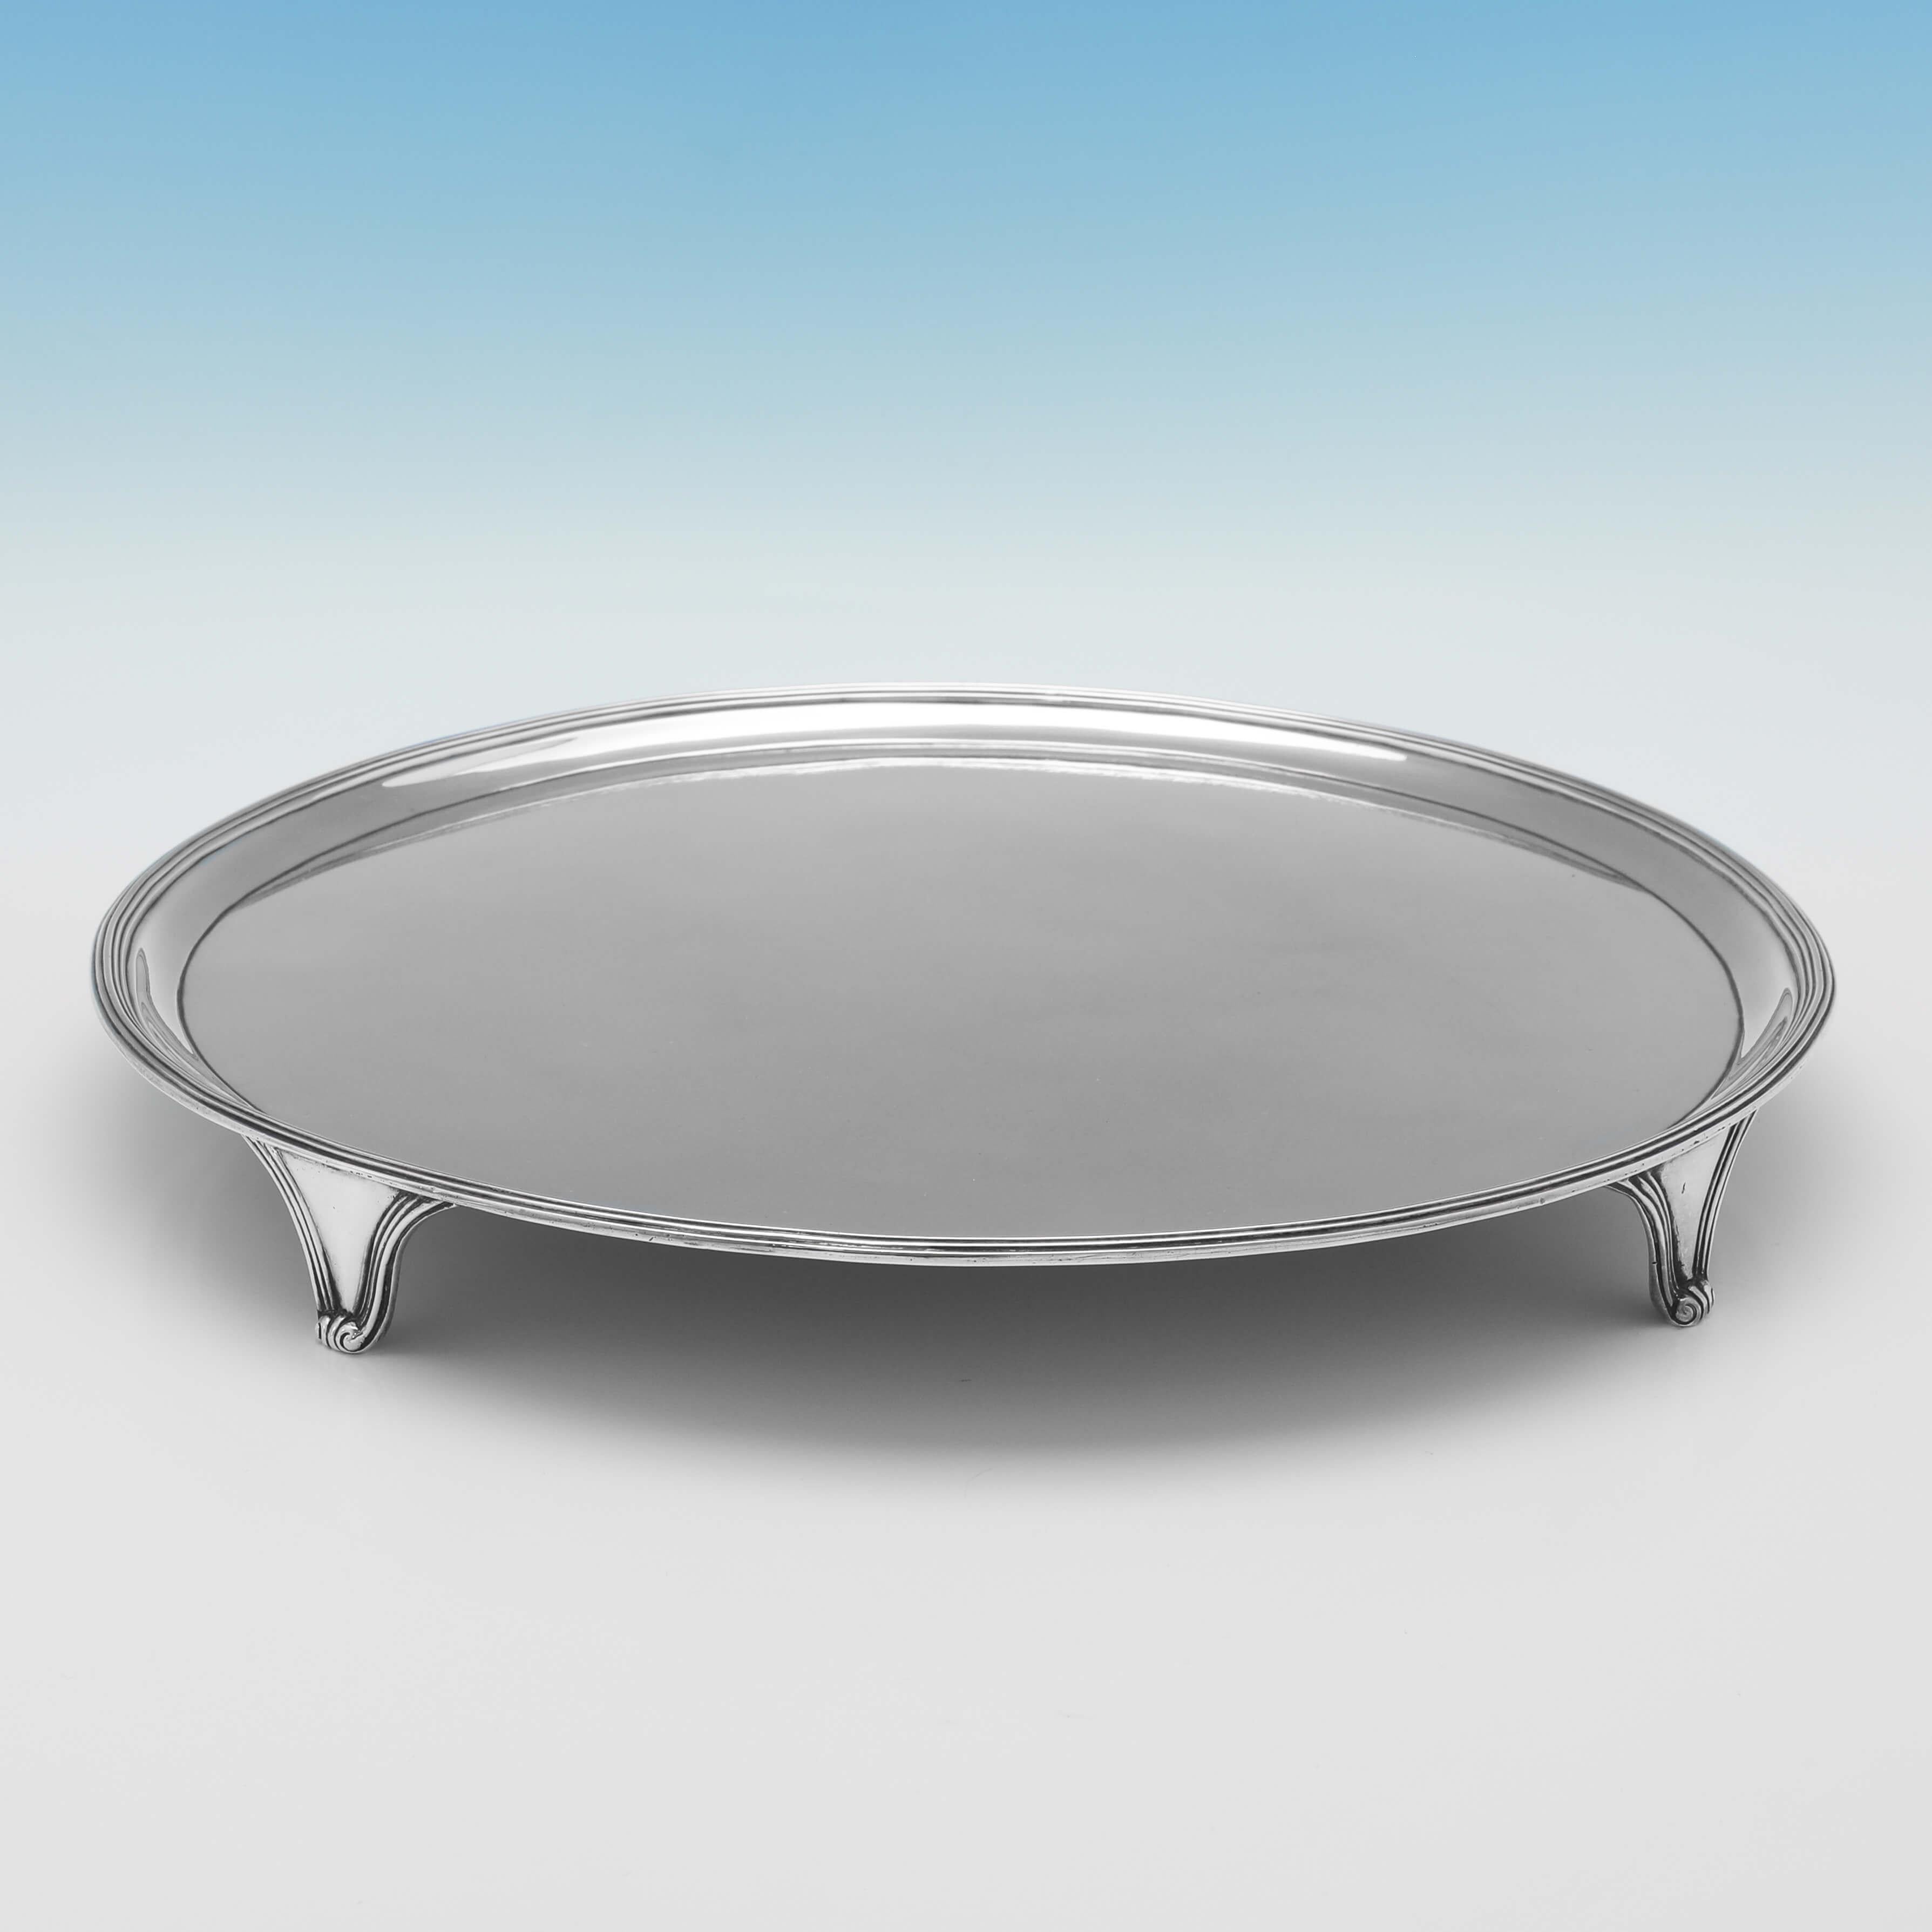 Hallmarked in London in 1792 by John Hutson, this very handsome, George III, Antique Sterling Silver Salver, is plain in style, round in shape, and features reed borders, and reed detailed feet. The salver measures 1.5